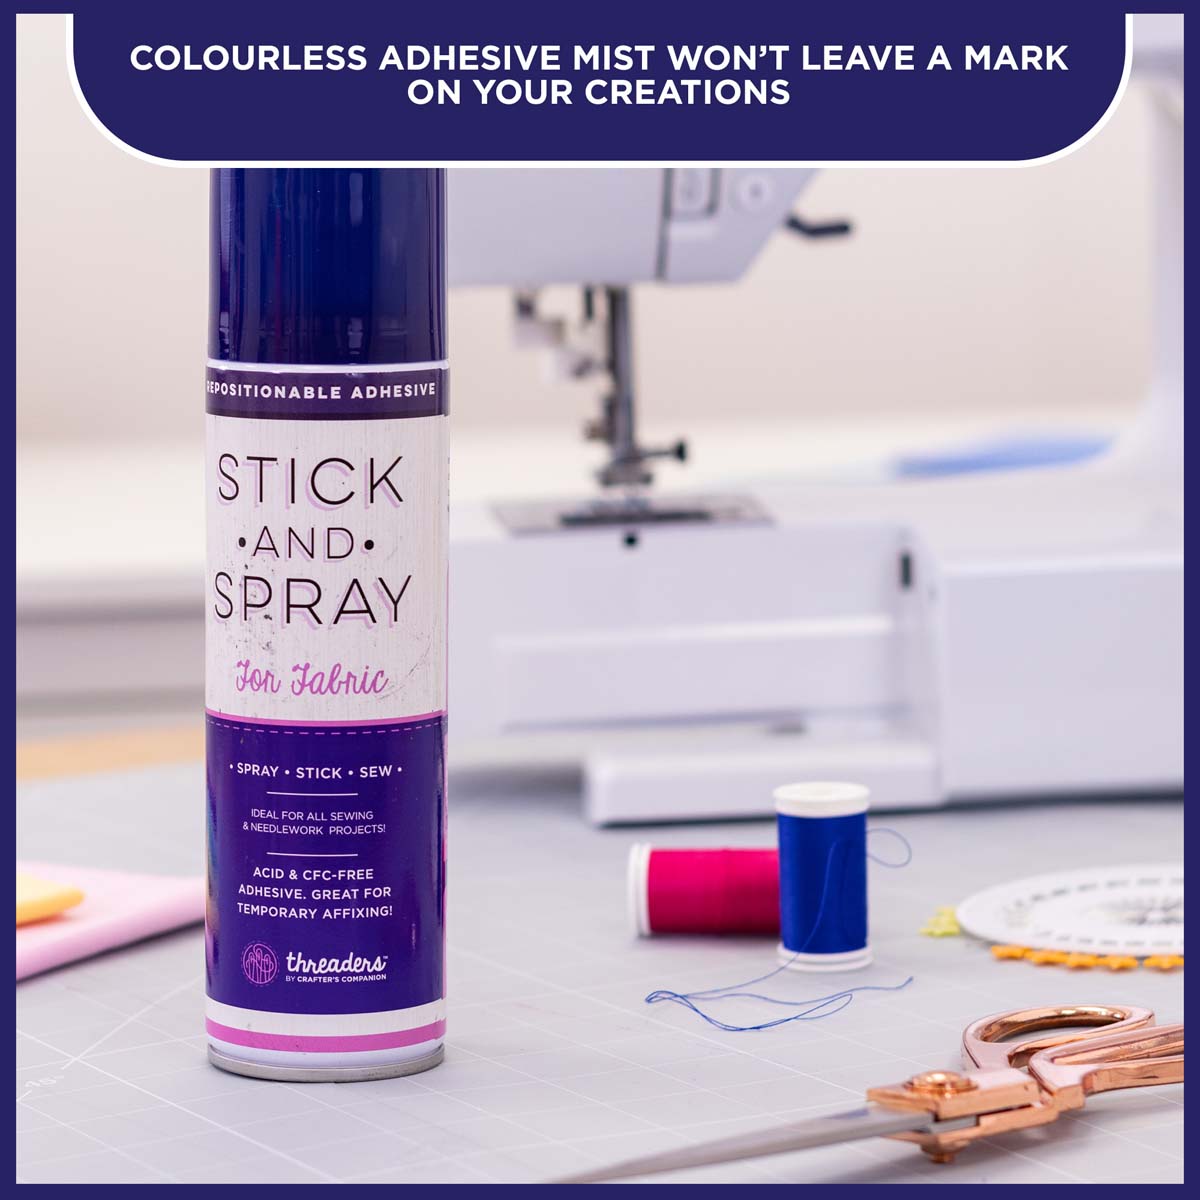 Crafter's Companion - Stick and Spray Adhesive For Fabric - Repositionable (DARK BLUE CAN)